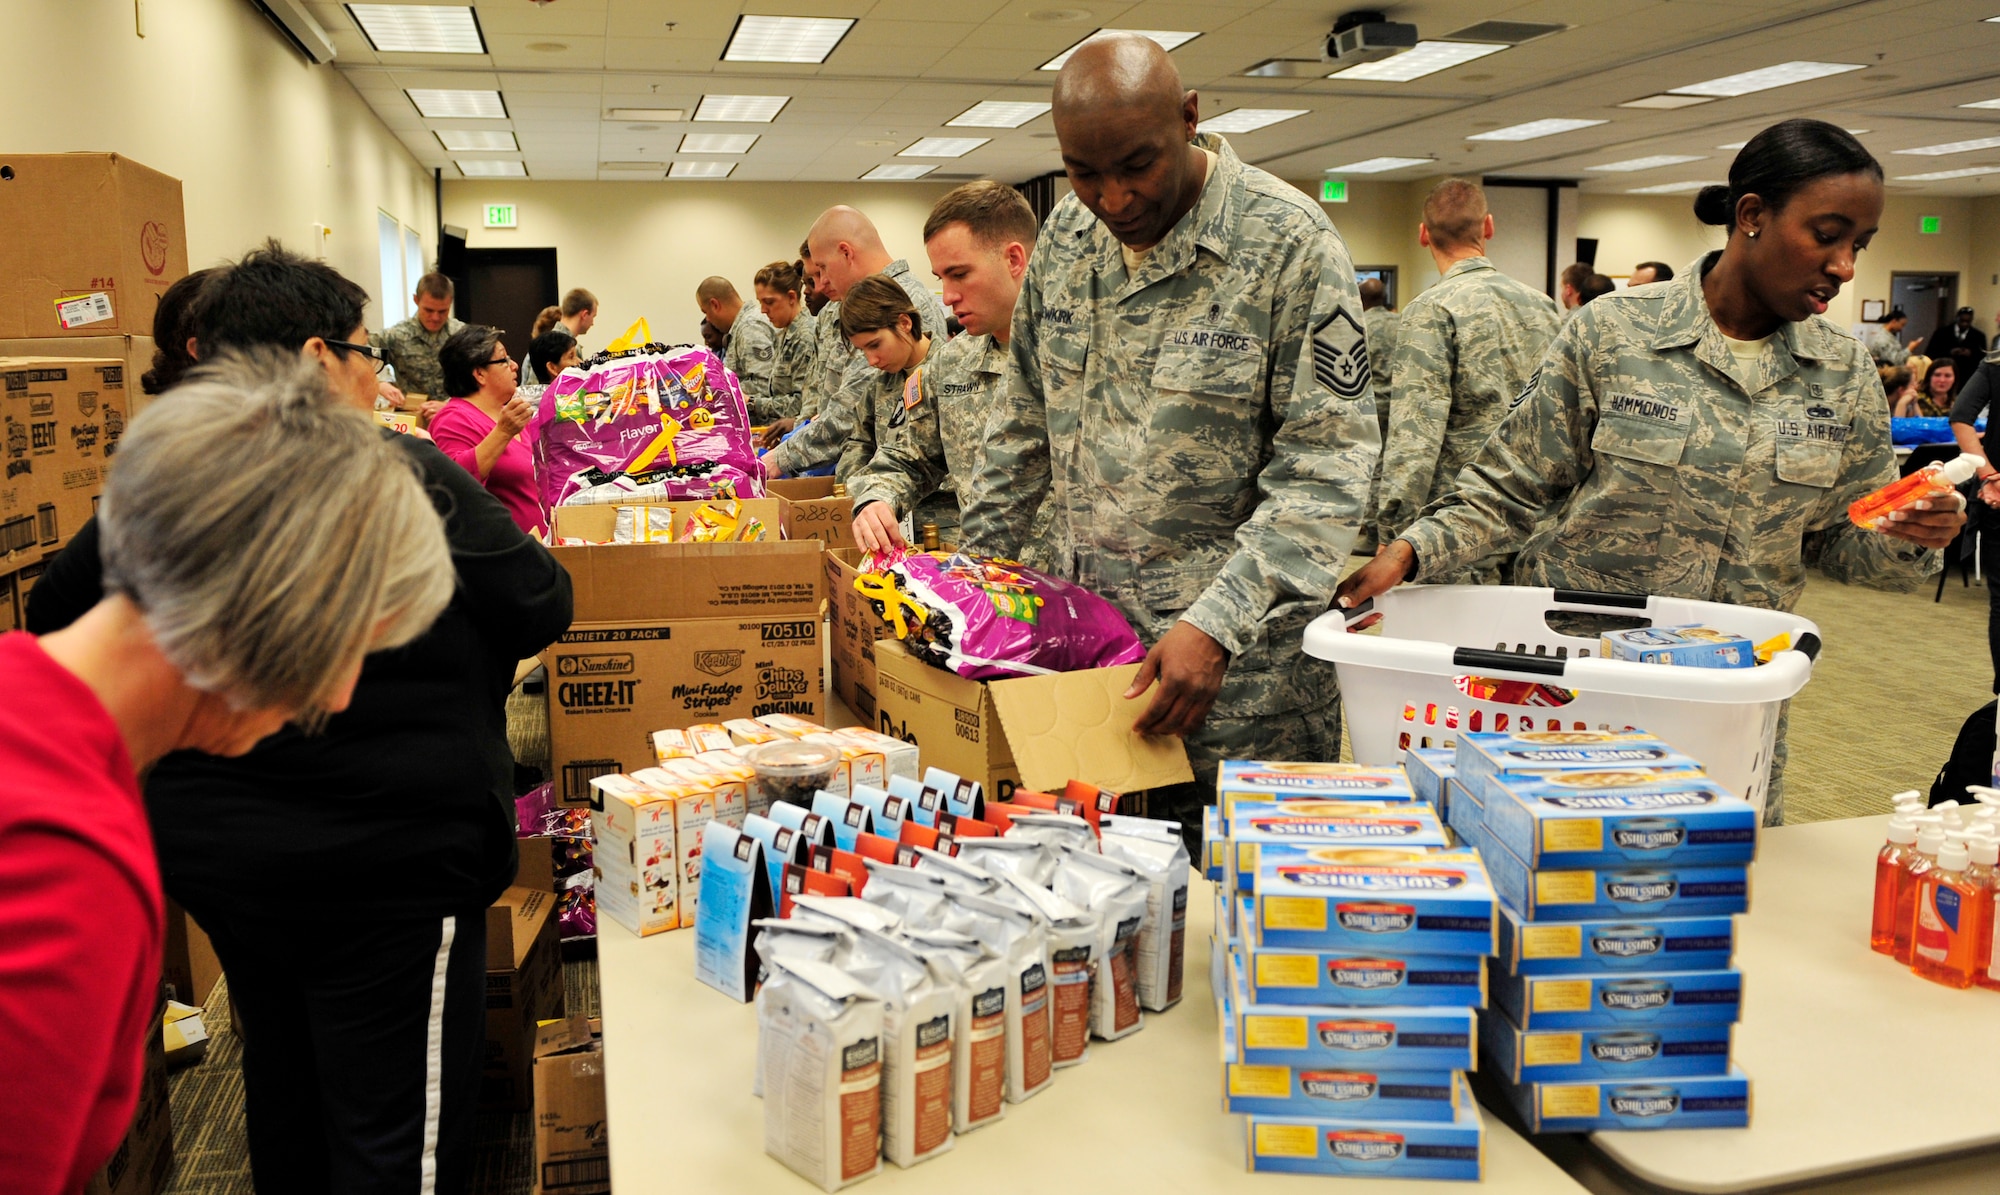 BUCKLEY AIR FORCE BASE, Colo. – Members from Buckley and the Smokey Hill Vineyard Food Bank joined together to bring joy and wellness to military families Nov. 19, 2012, at the base chapel. Thanksgiving is near, so as a result, this food drive gave military families stability during the holidays. (U.S. Air Force photo by Airman 1st Class Darryl Bolden Jr.)